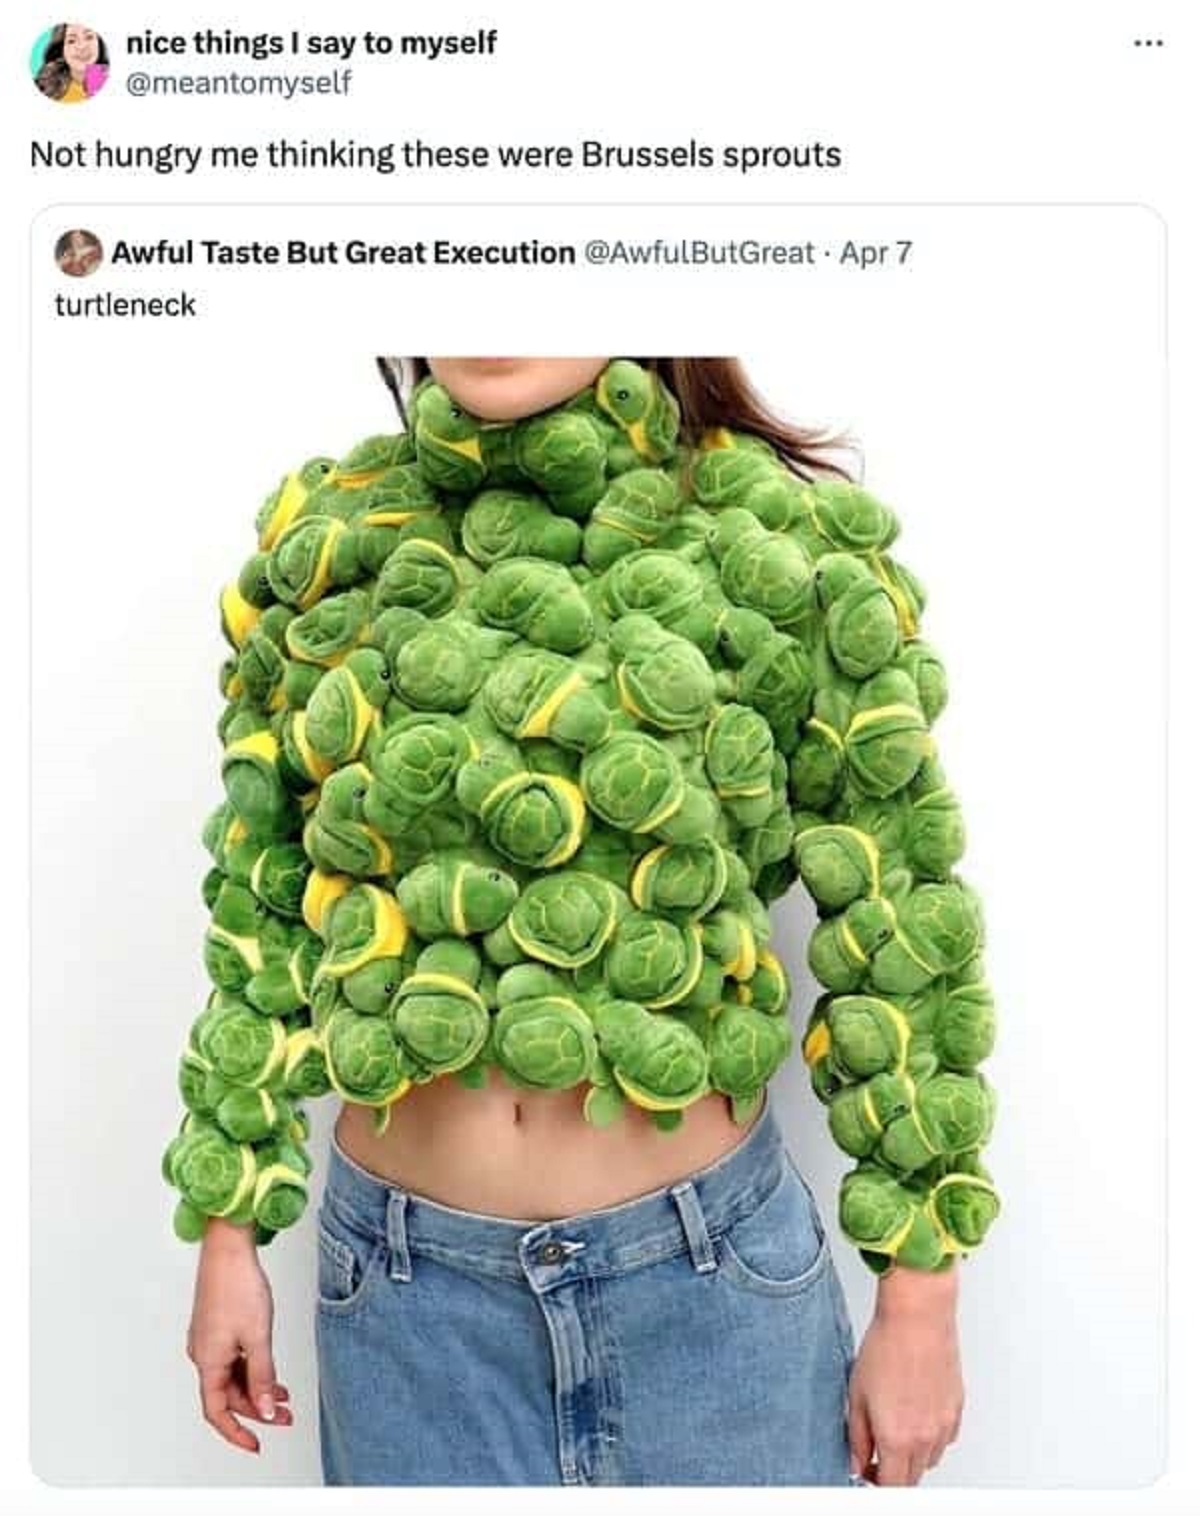 Gab Bois - nice things I say to myself Not hungry me thinking these were Brussels sprouts Awful Taste But Great Execution Apr 7 turtleneck